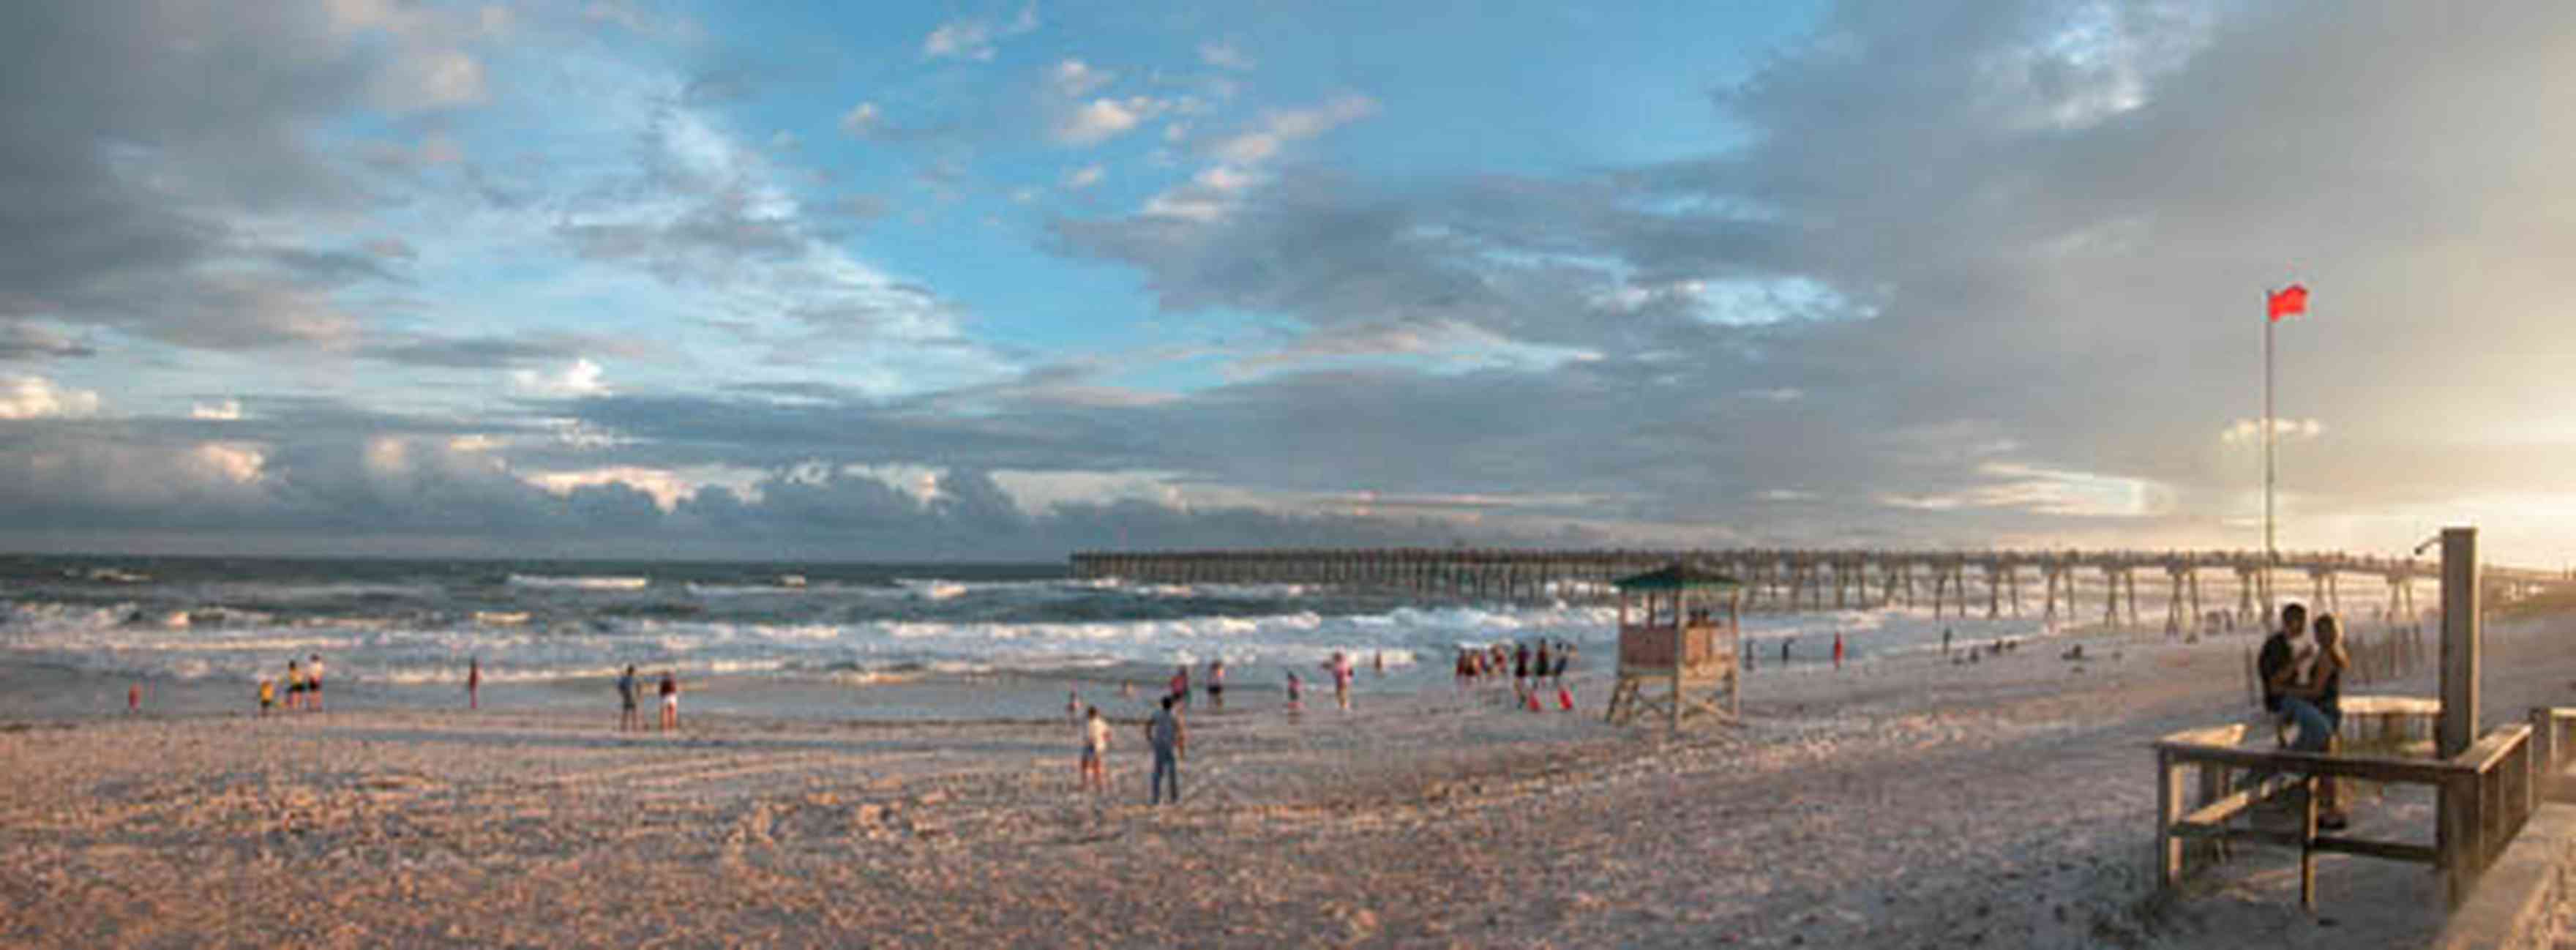 Pensacola-Beach:-Casino-Beach_01-copy.jpg:  beach front, surf, red flag, high surf, waves, lifeguard, swimmers, fishing pier, gulf of mexico, storm clouds, tropical storm, mixed skies